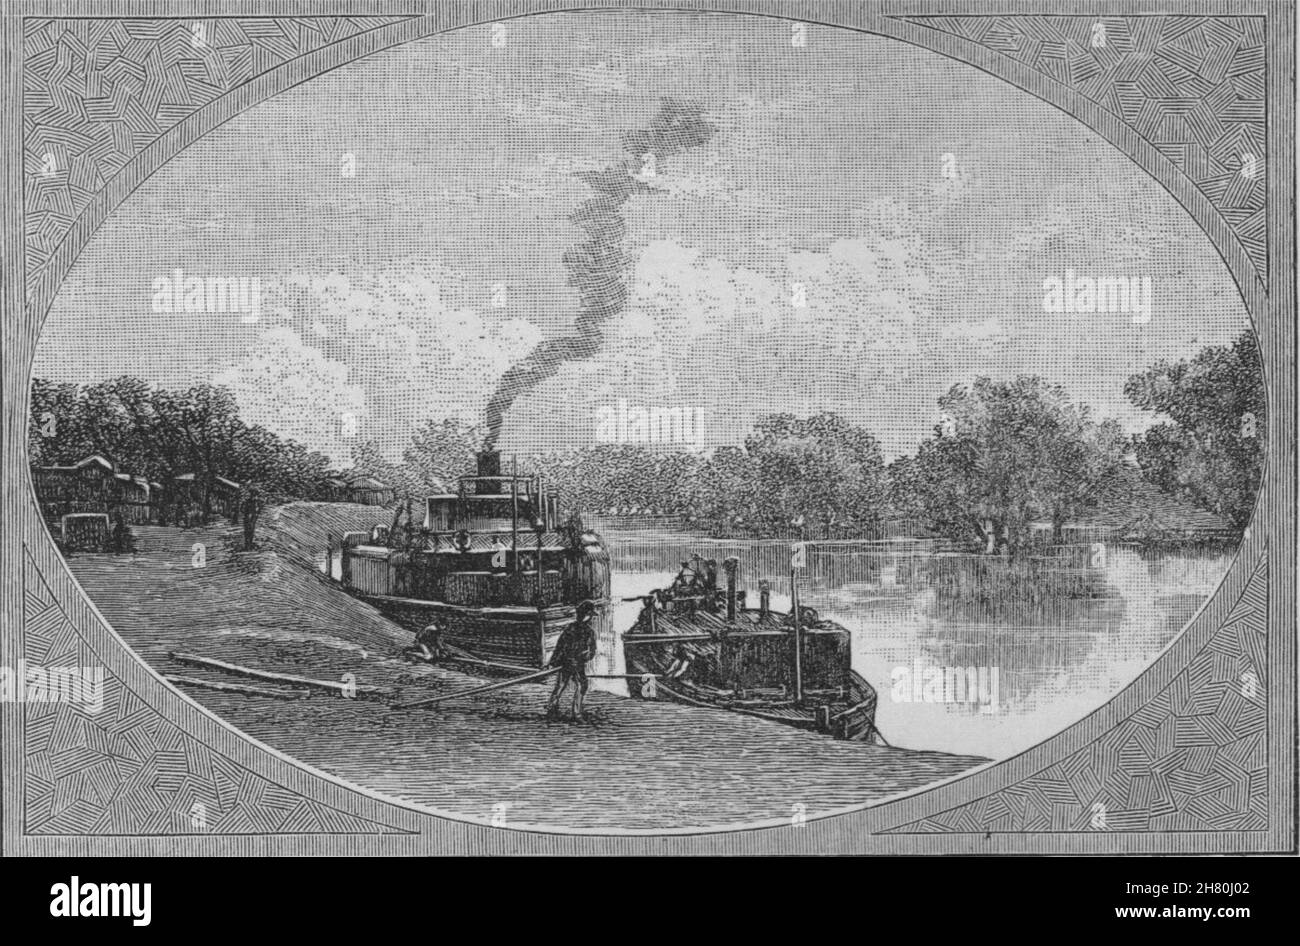 The River Darling at Bourke. The Murray river basin. Australia 1890 old print Stock Photo